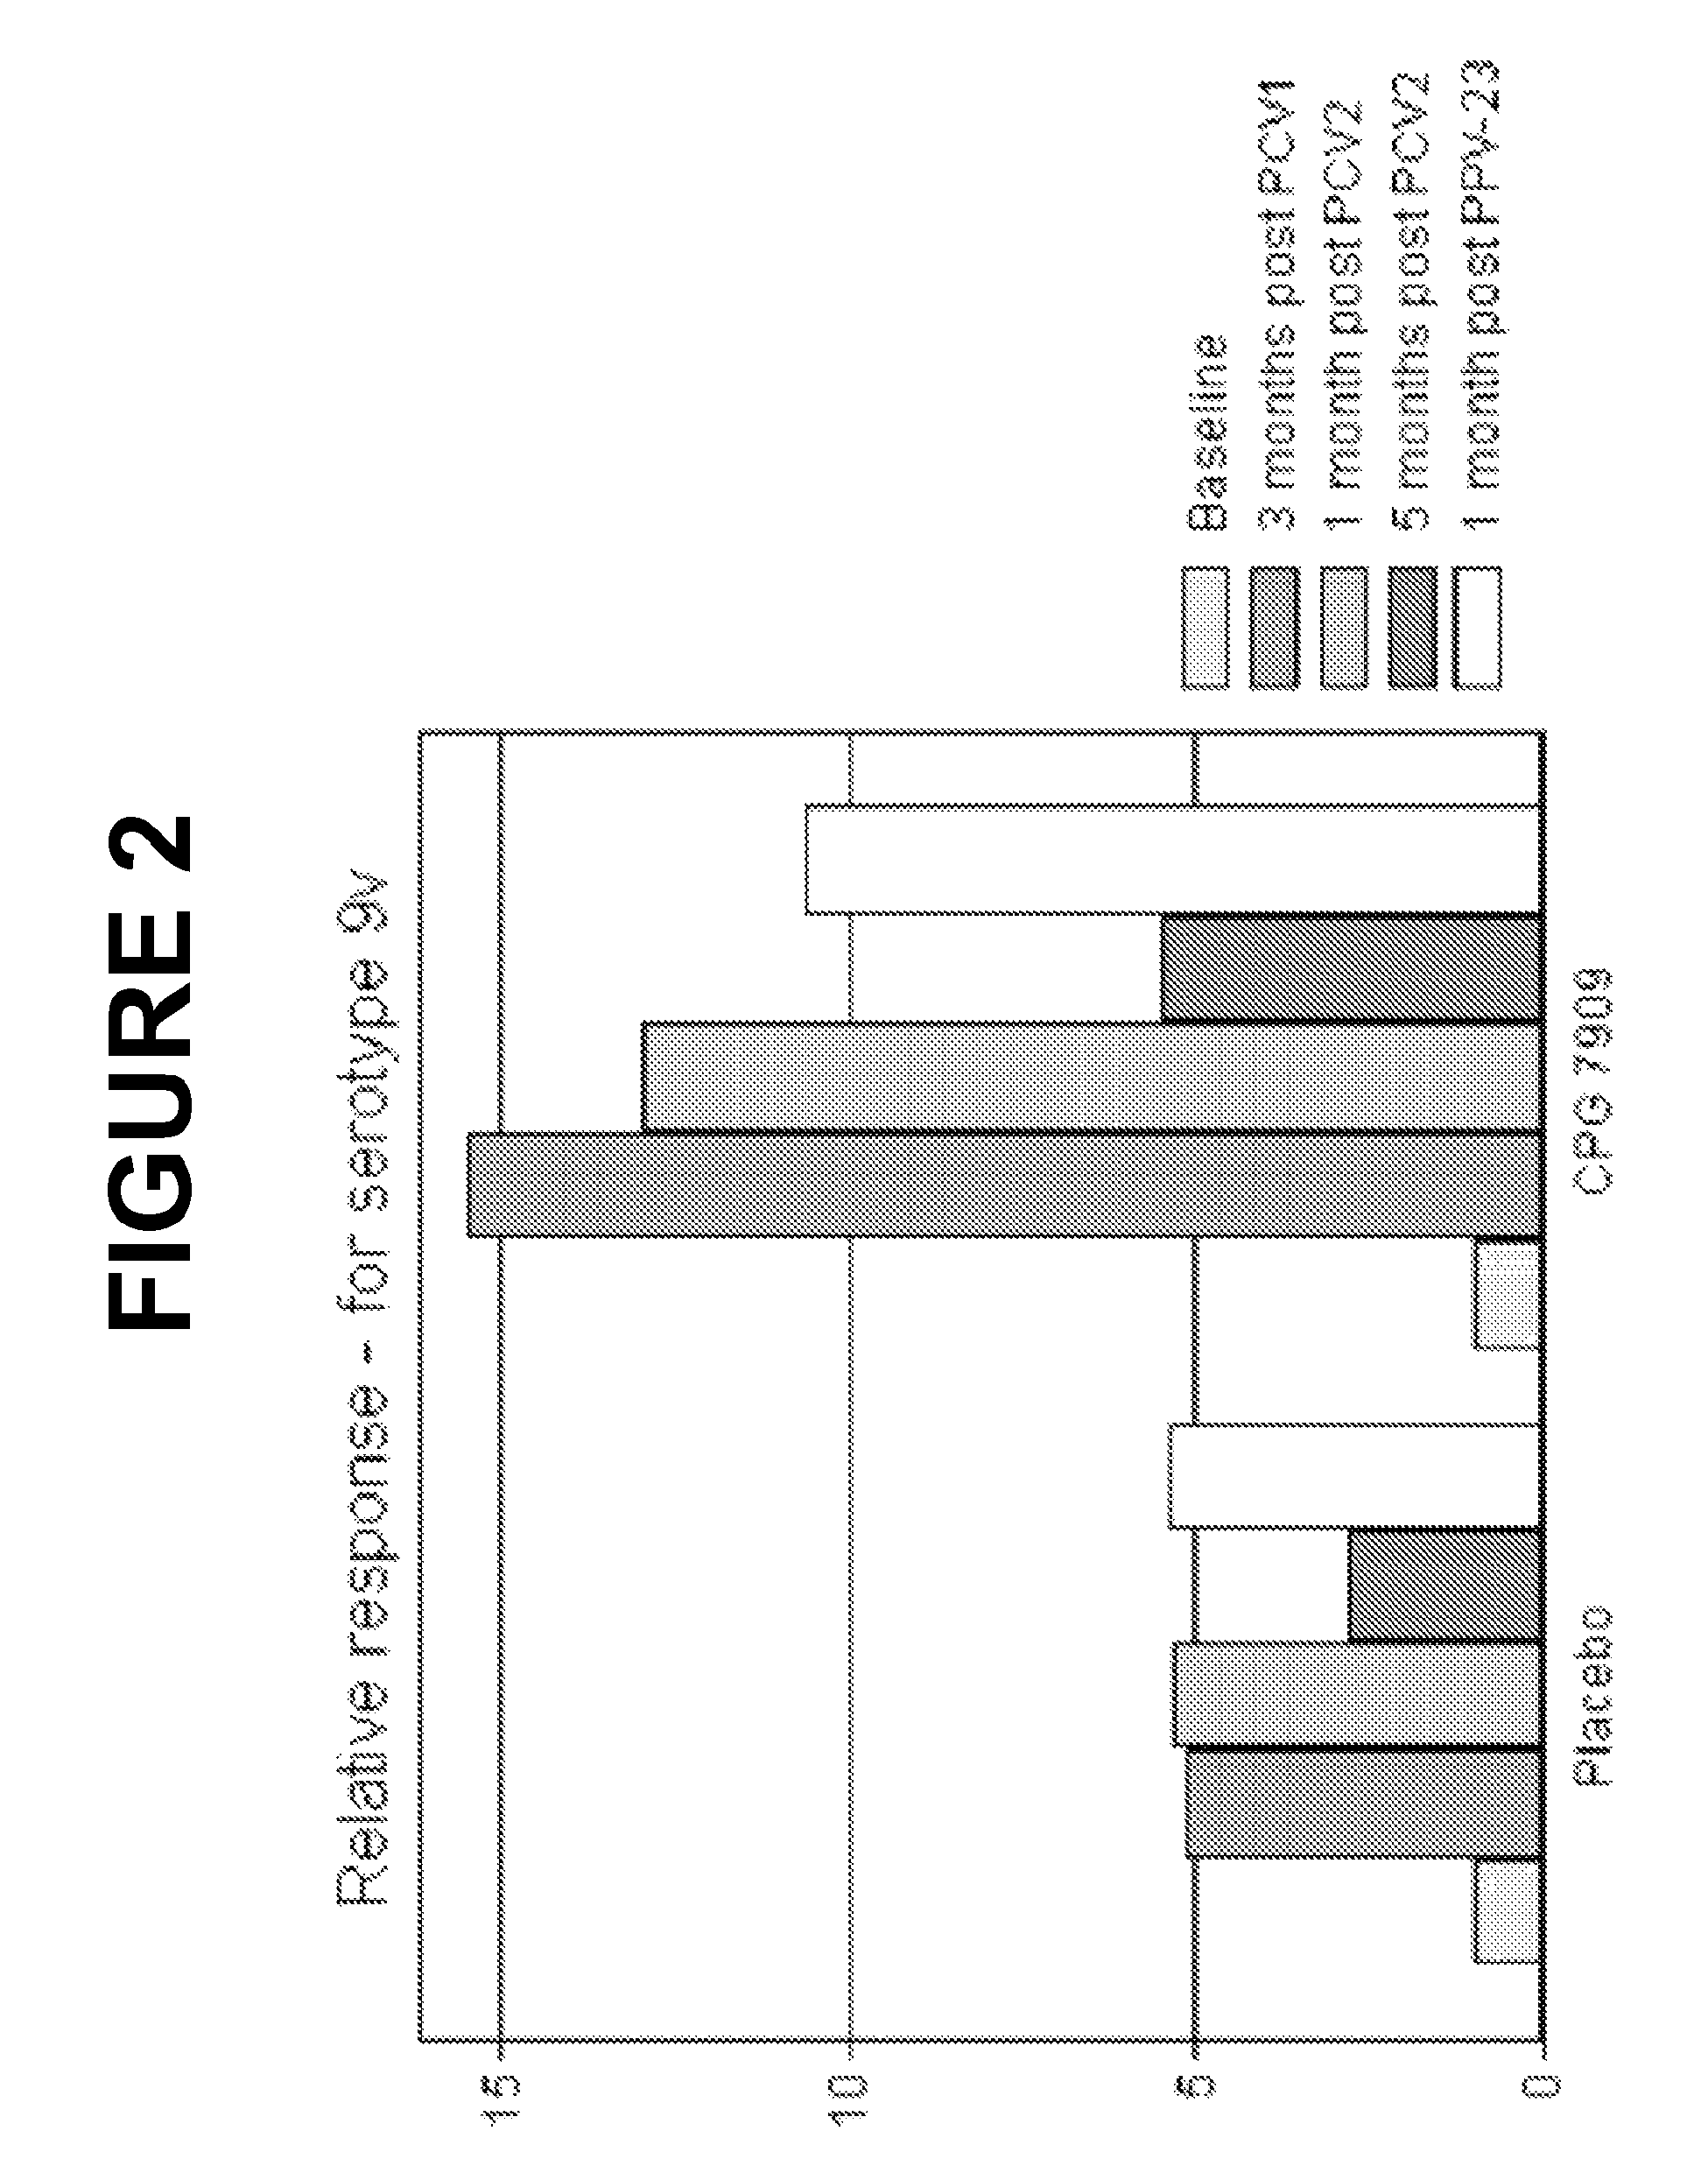 Pneumococcal vaccine and uses thereof